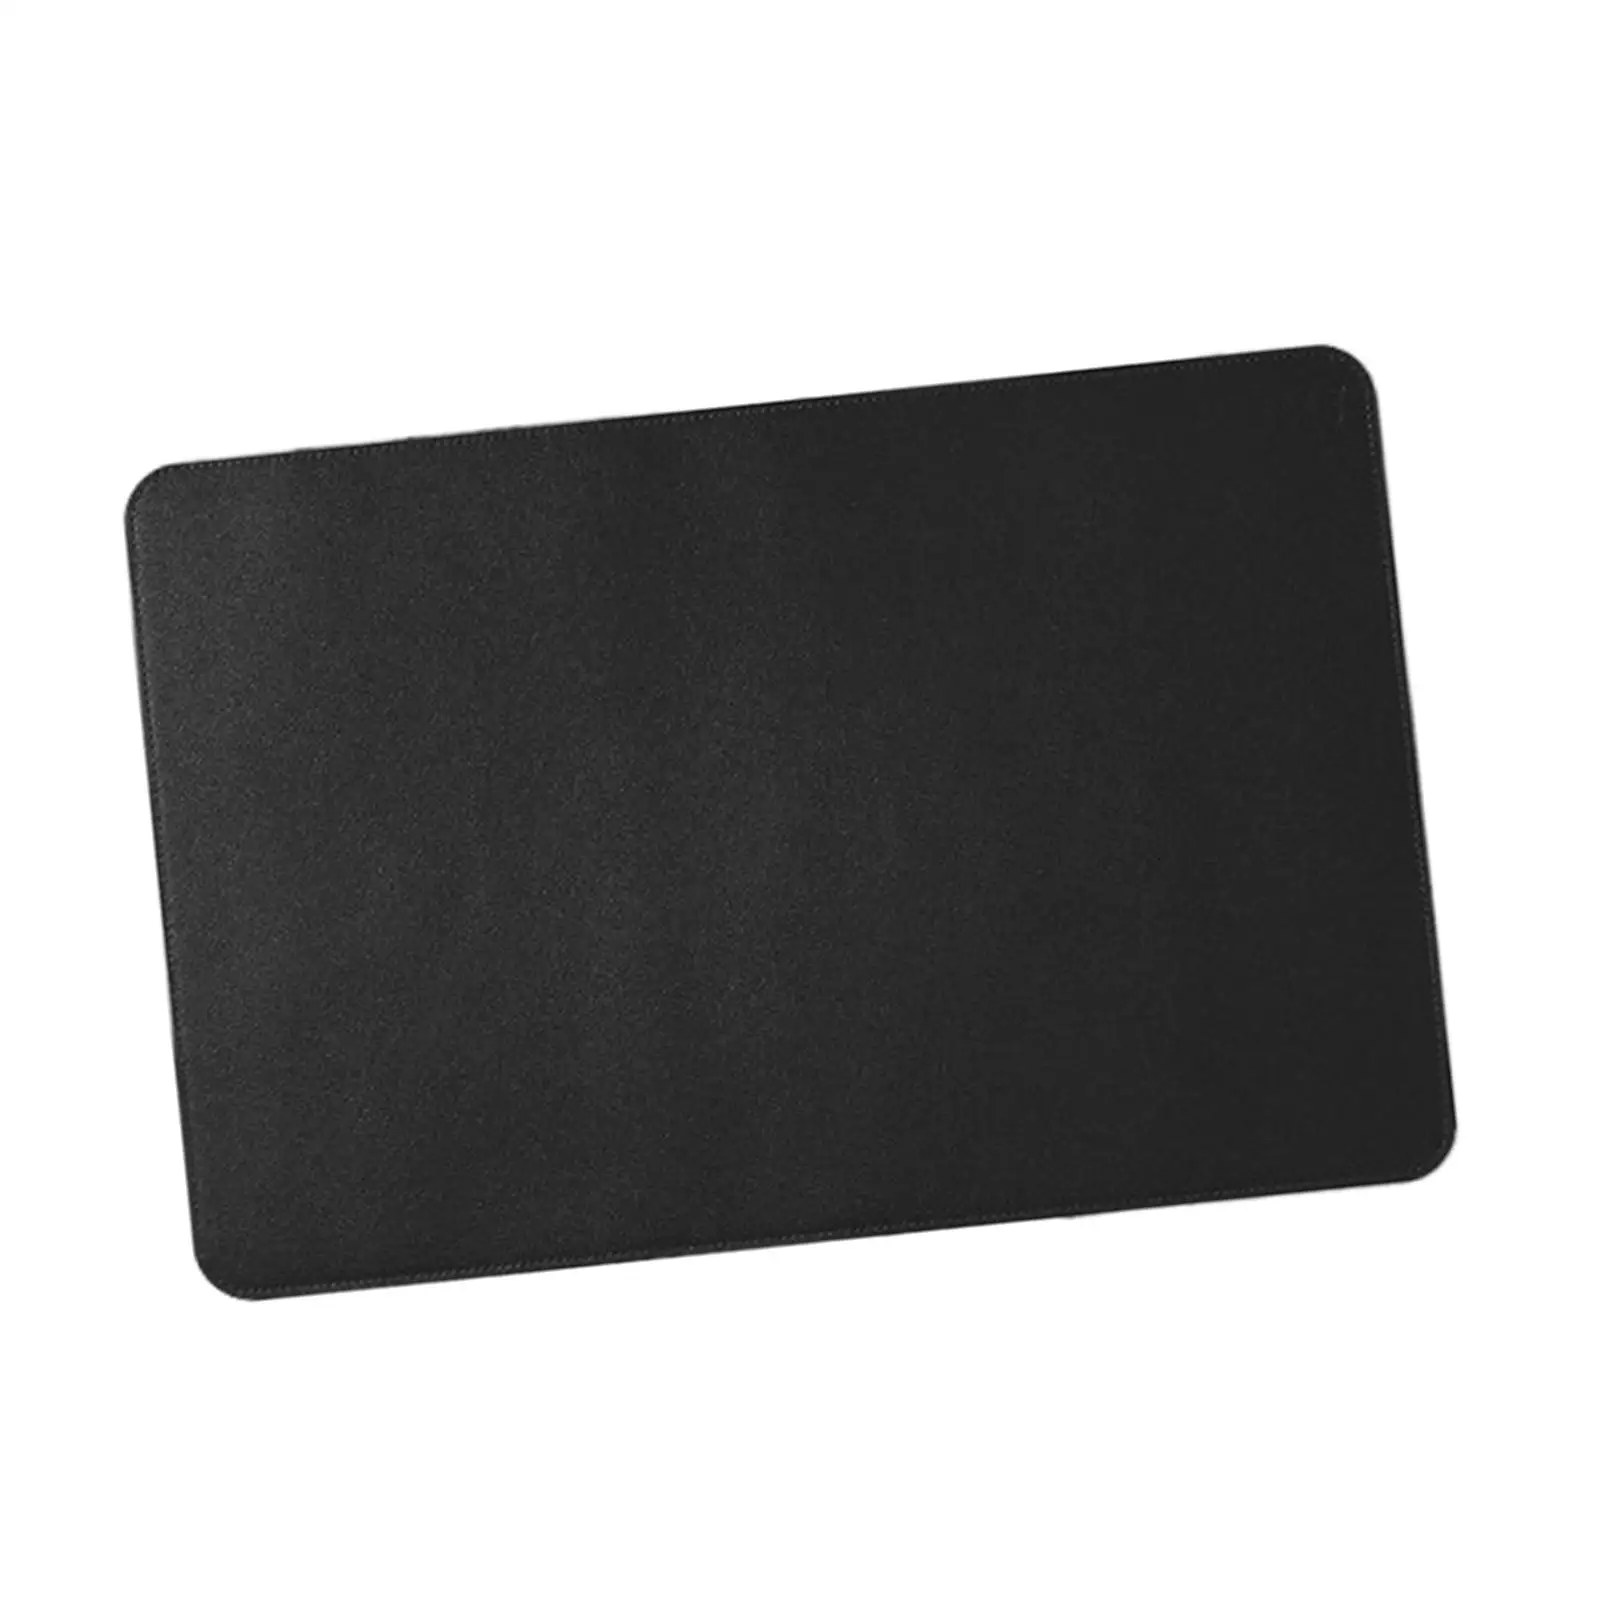 PU Leather Table Mat Rectangle Desk Mat Waterproof Flooring Meal Mat Table Cover for Hiking Camping Event Party Kitchen Bbq